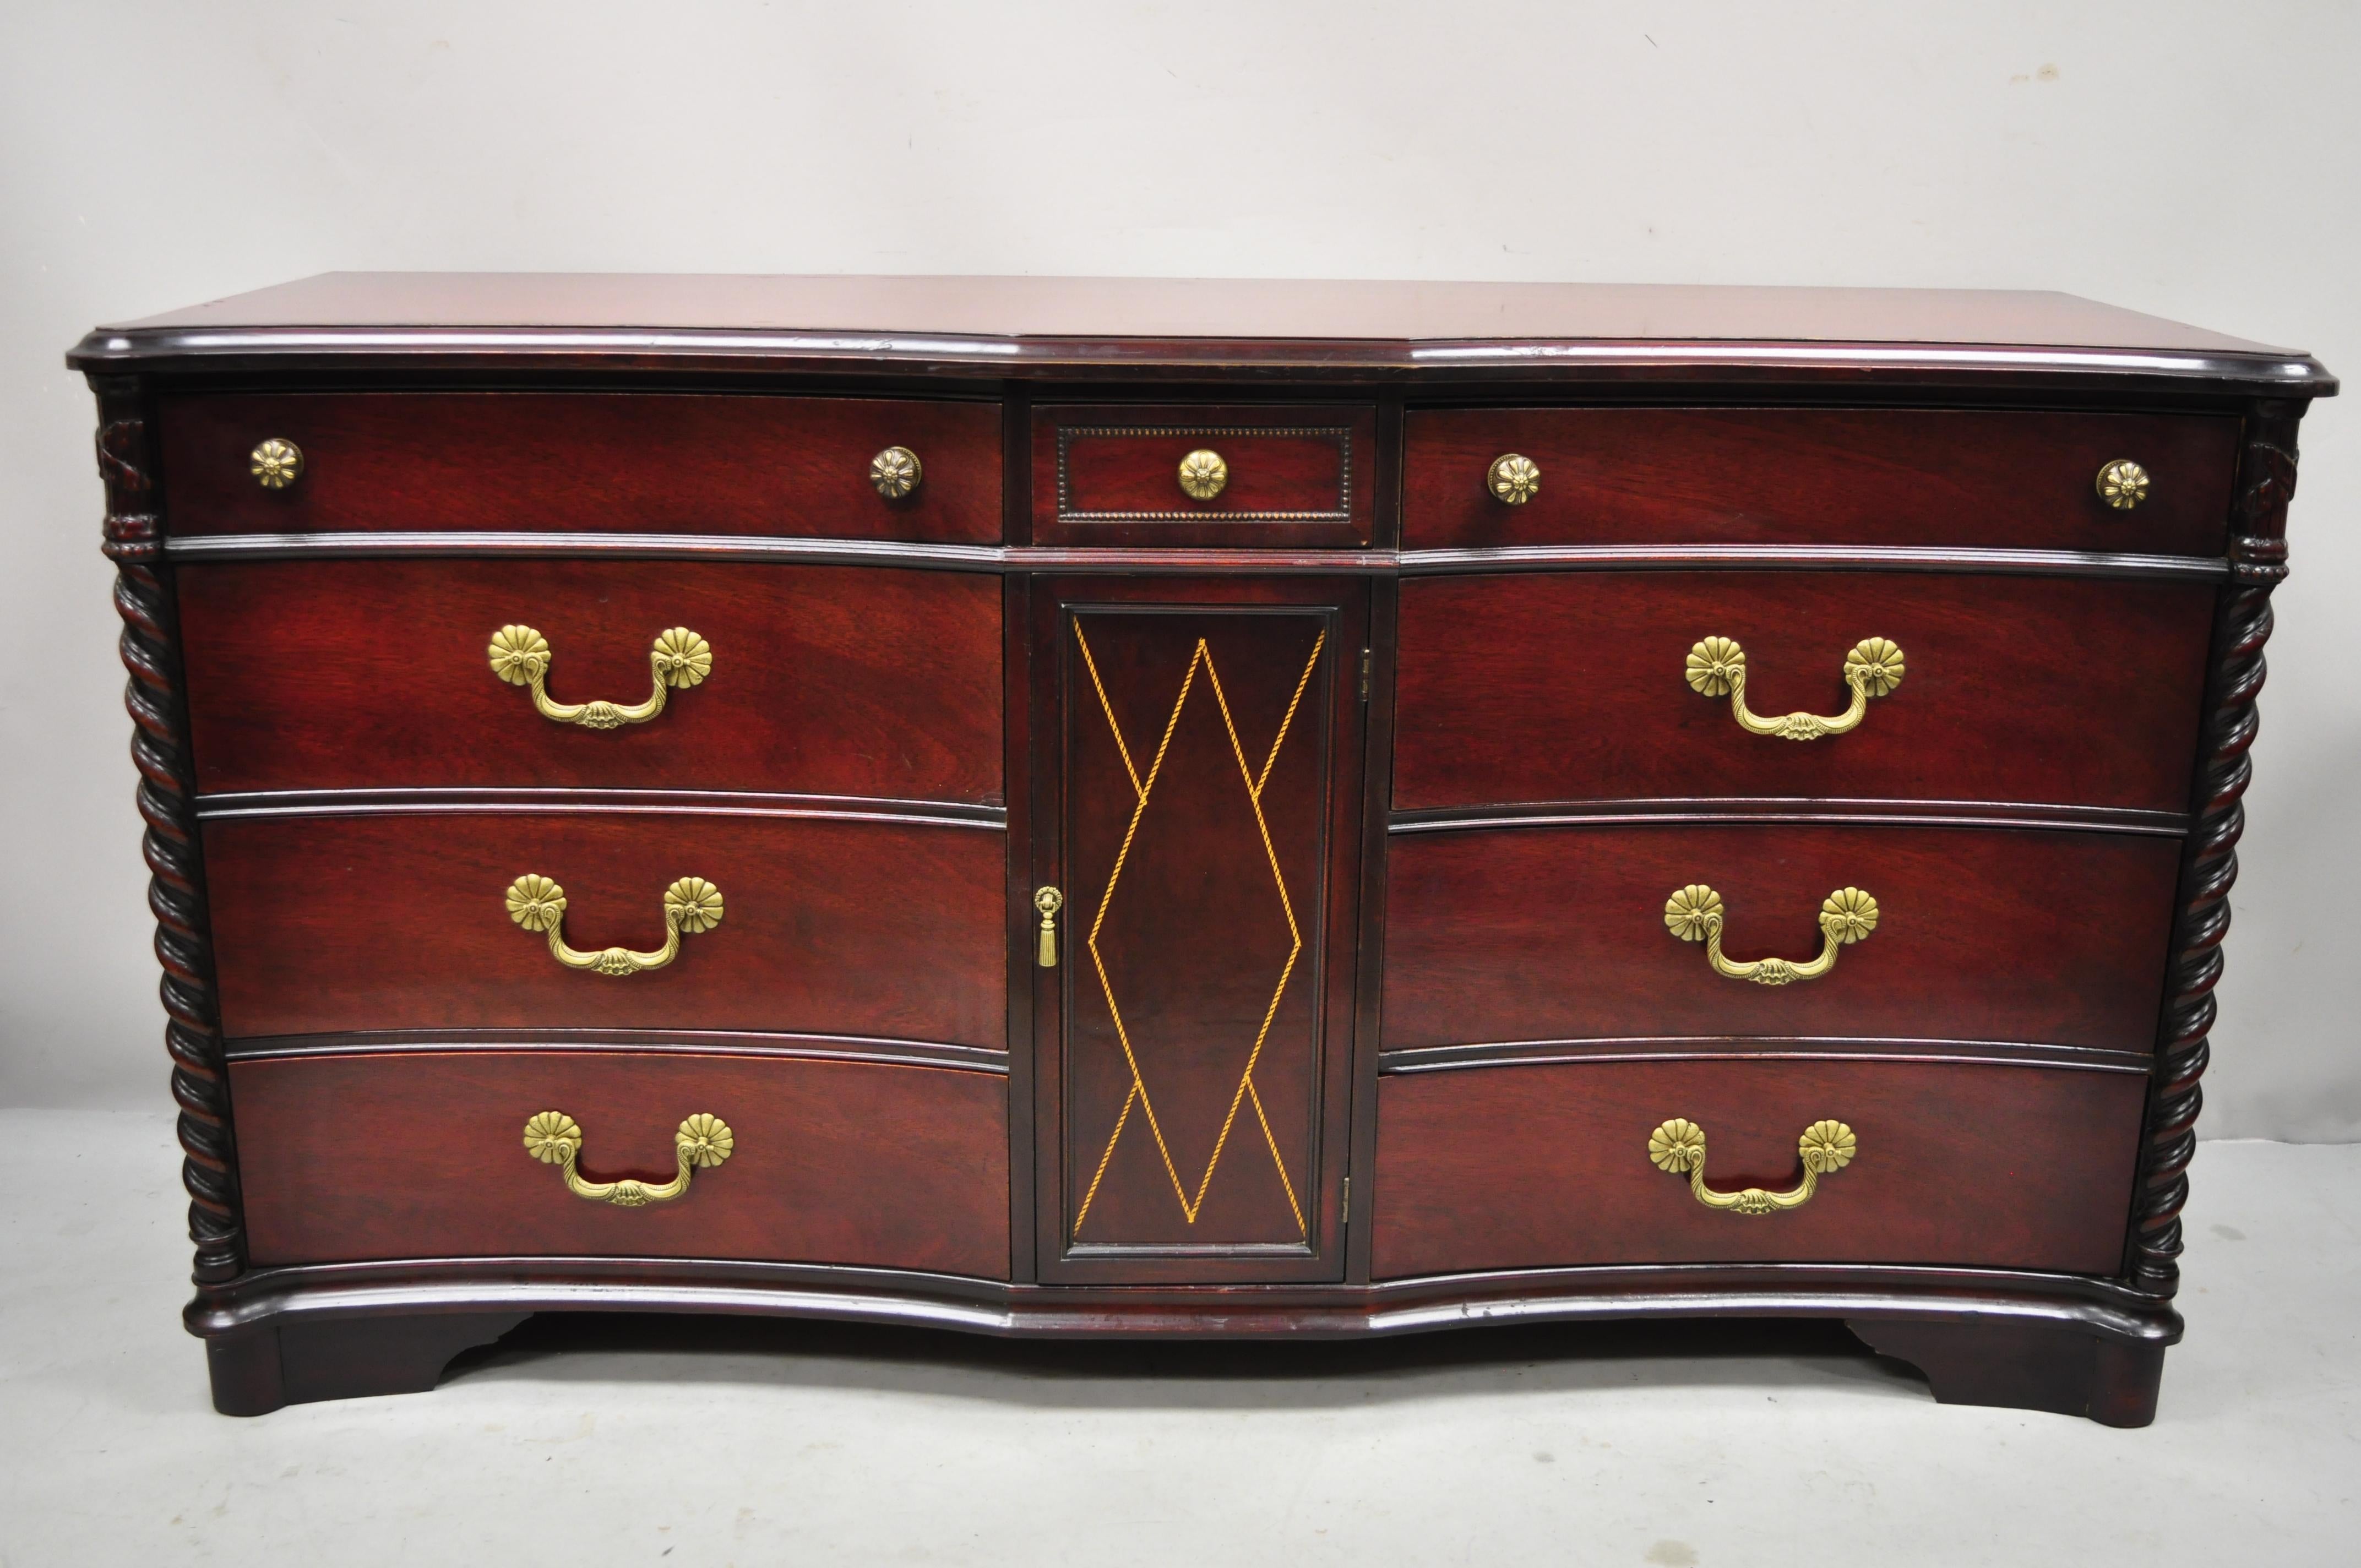 Antique Mahogany Chinese Chippendale long dresser credenza with tooled leather door front. Item features custom glass top included, tooled leather door front, beautiful wood grain, nicely carved details, 1 swing doors, 9 dovetailed drawers, solid